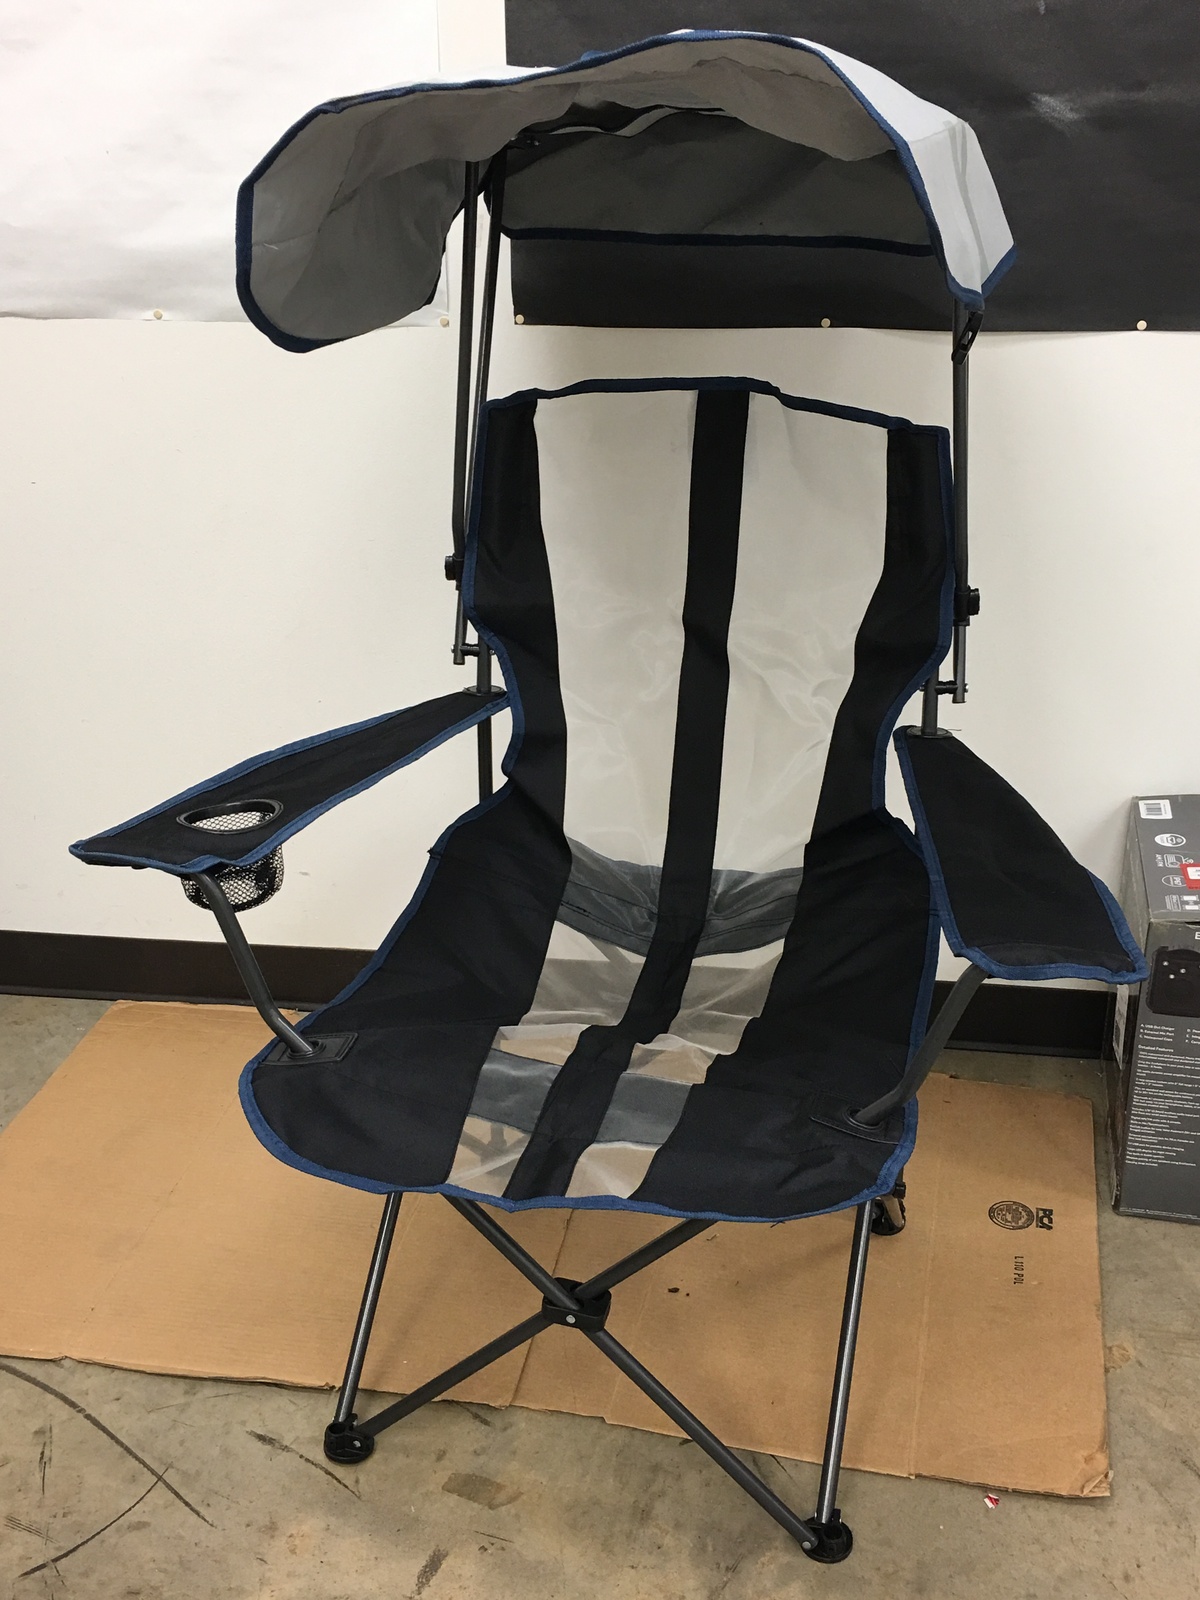 Unique Kelsyus Backpack Beach Canopy Chair for Living room